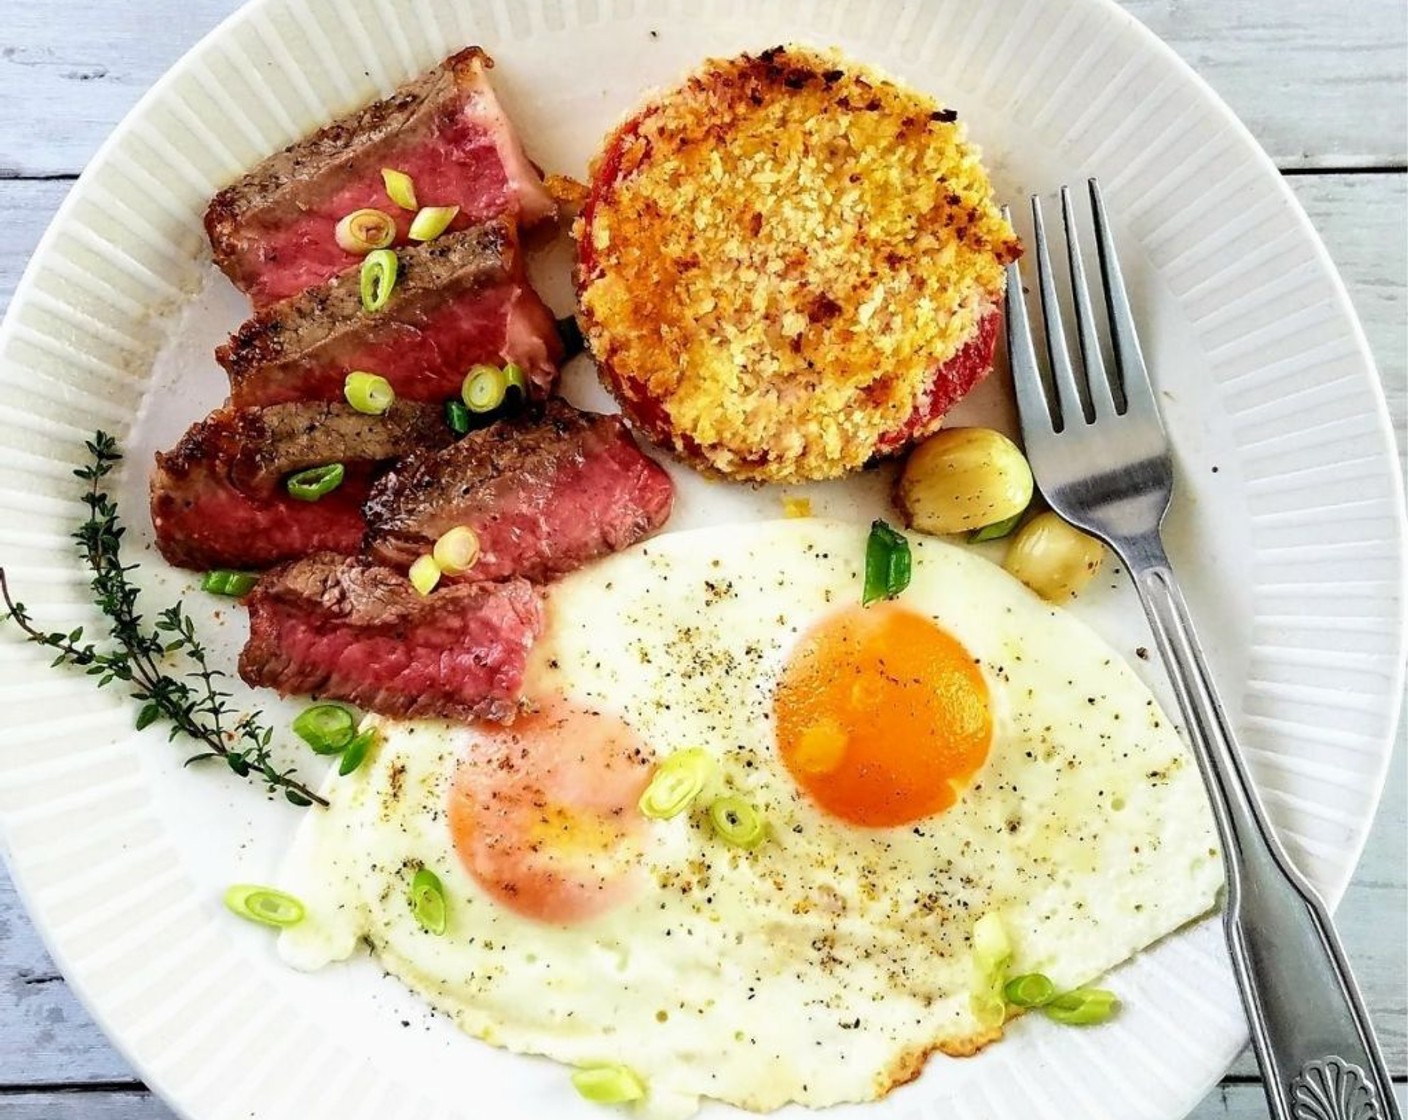 step 10 Slice the sirloin steak and plate alongside the eggs and fried tomatoes. Serve the steak and eggs immediately.